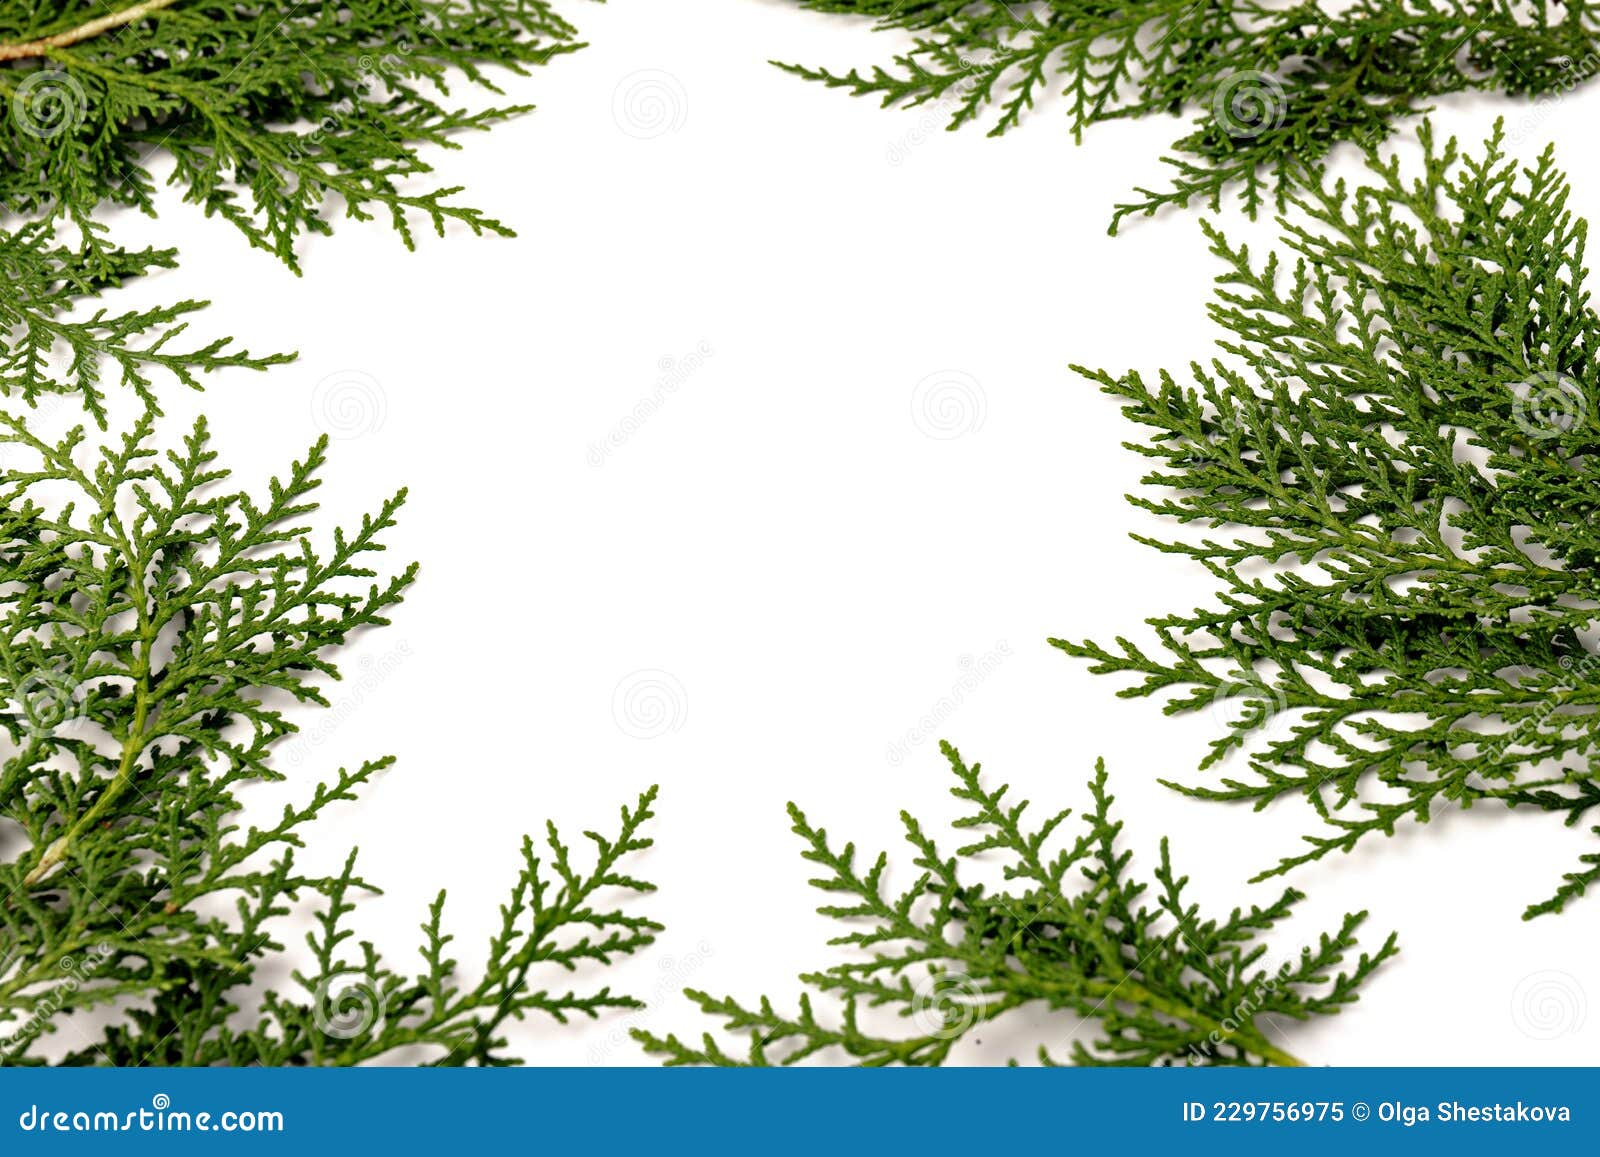 Fresh Cypress Branch Isolated on White Background Stock Image - Image of  frame, evergreen: 229756975